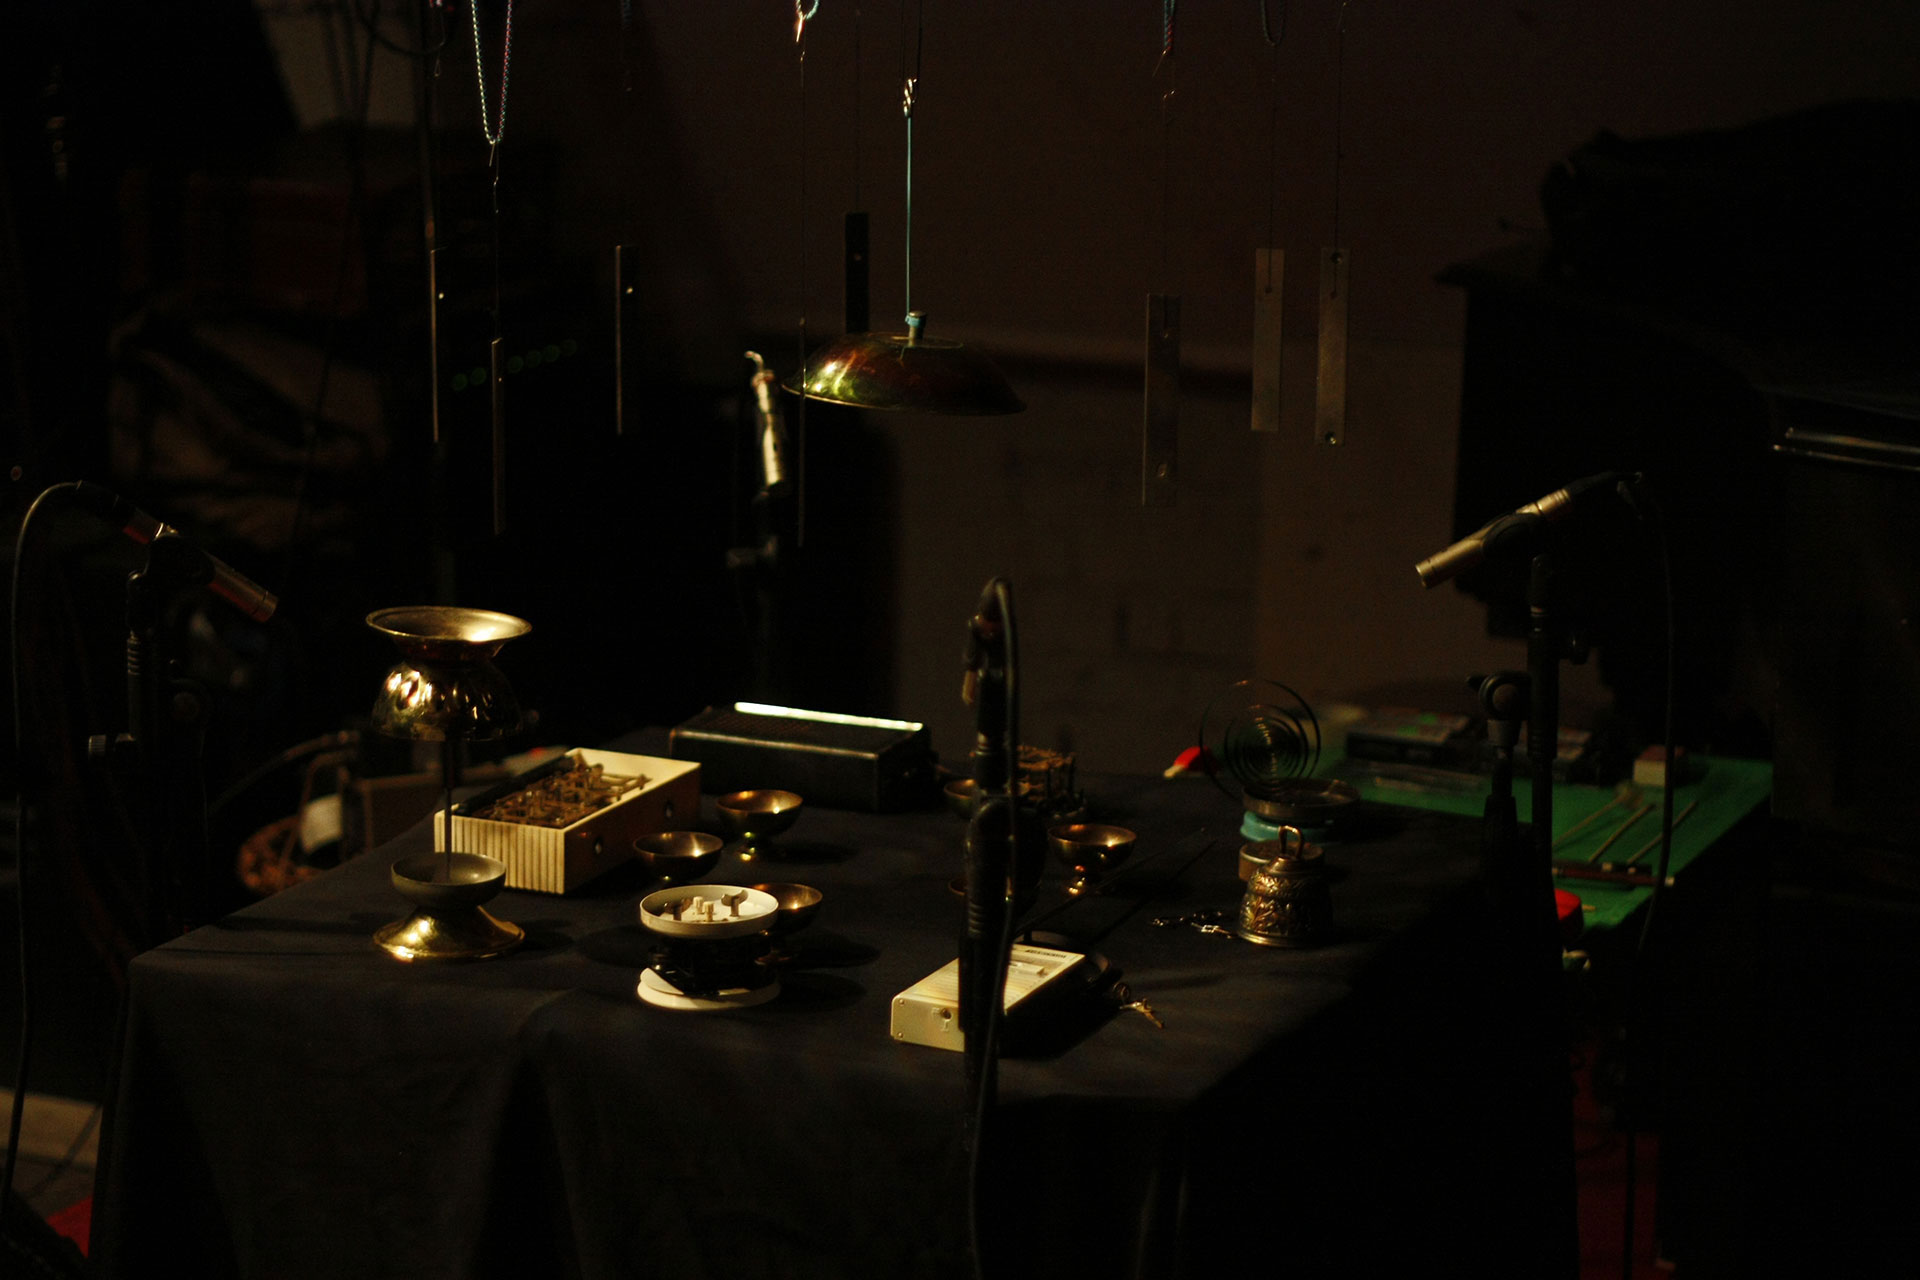 Audioarchitecture I, 2014. Series of spatial compositions of found and reconstructed objects that are converted into multi-channel sound canvases in real time